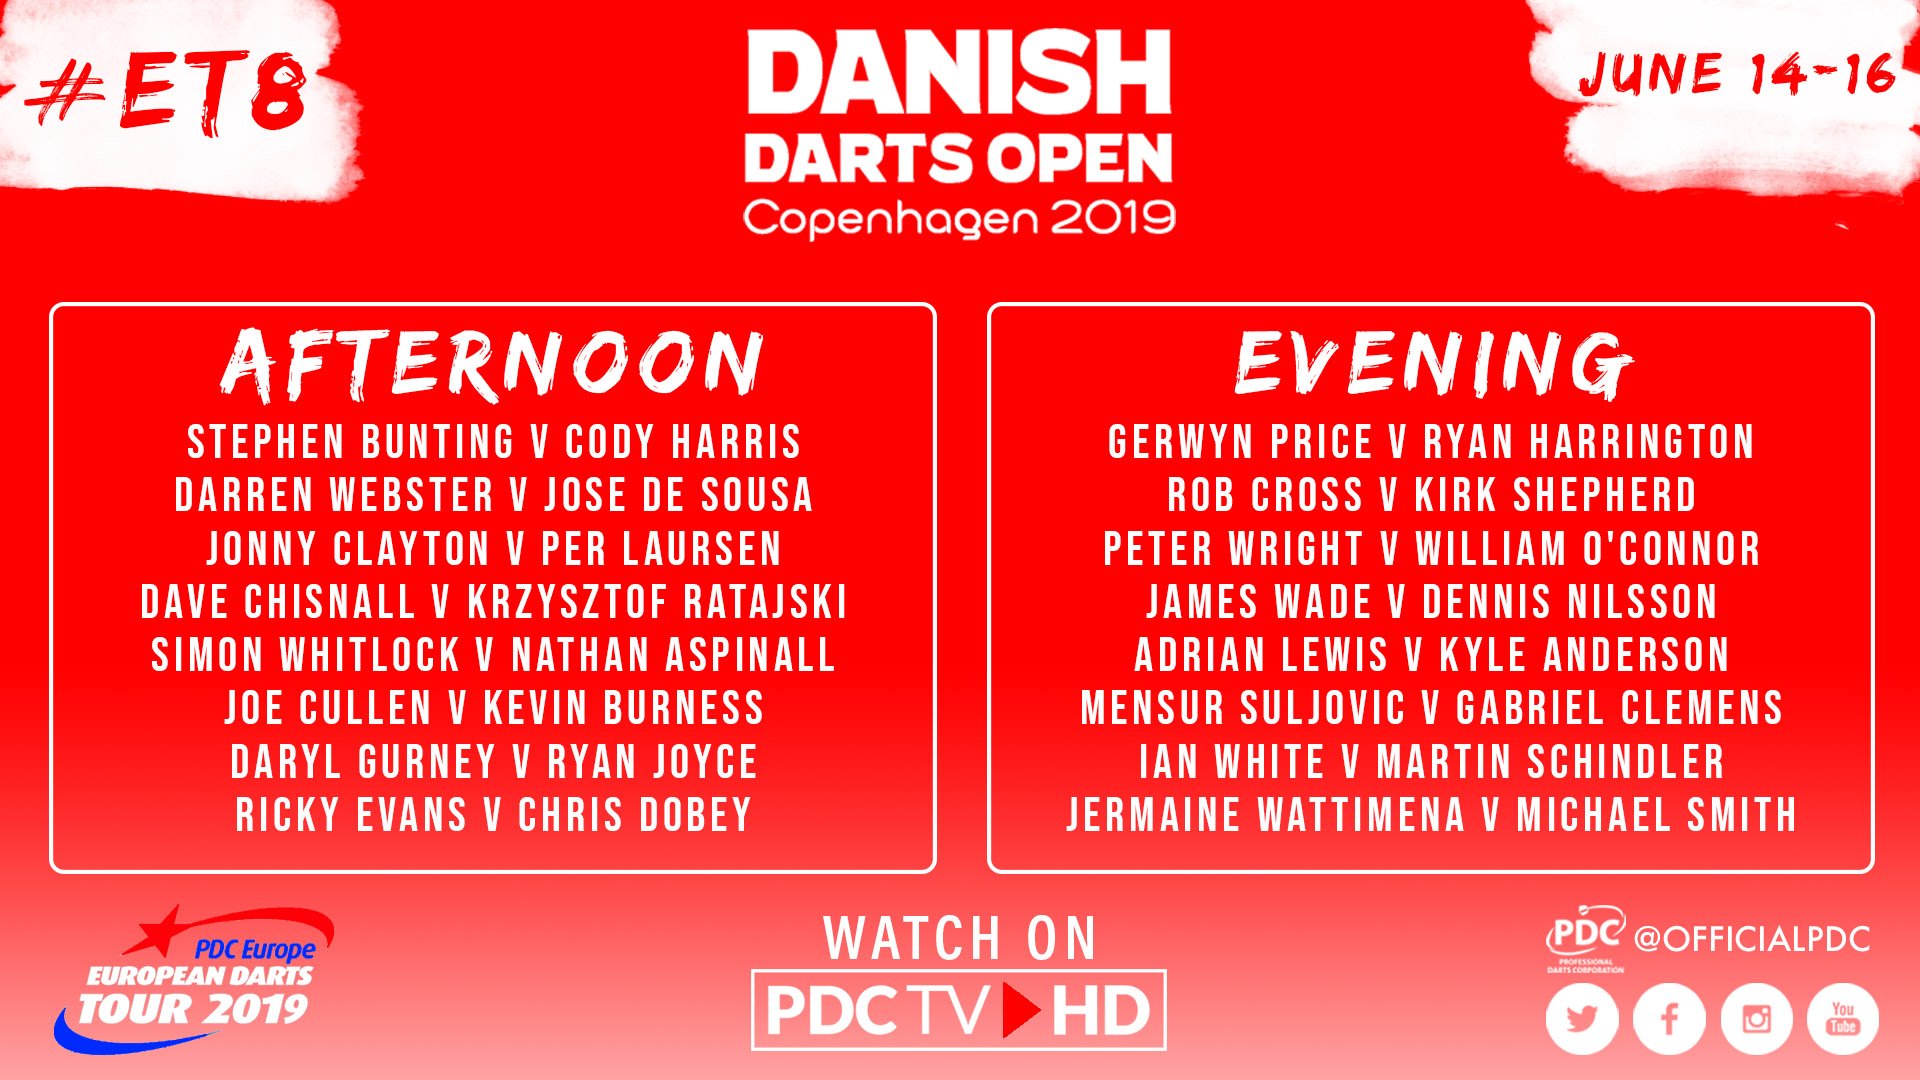 byld Ti skat PDC Darts on Twitter: "Here's what's coming up in Copenhagen on Day Two of  the Danish Darts Open... Watch all of the round two action on  https://t.co/hSz0zP5tWg from 1200 BST. https://t.co/3uIrRsOJQ4" /